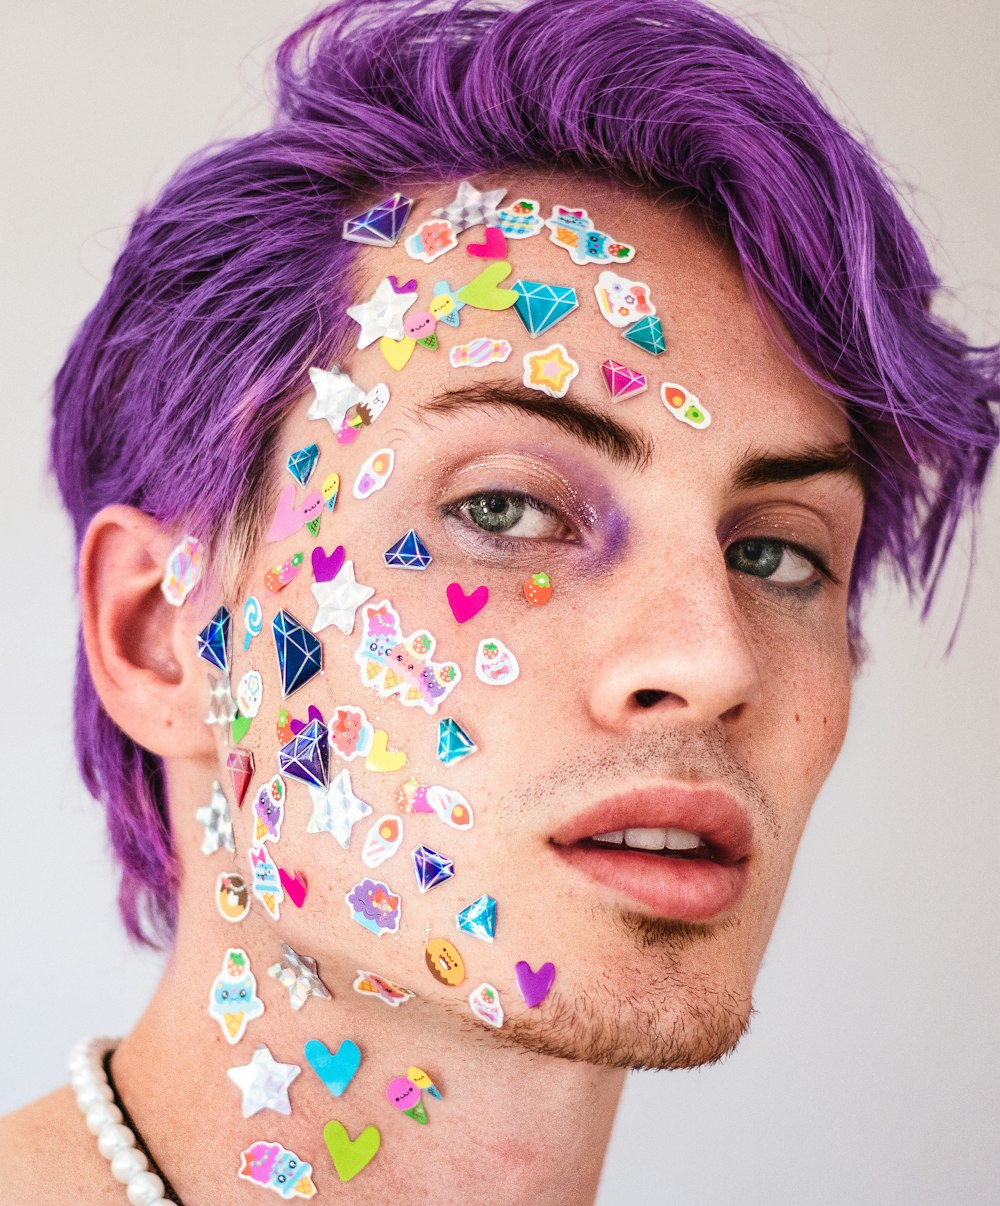 a man with purple hair and lots of stickers on his face